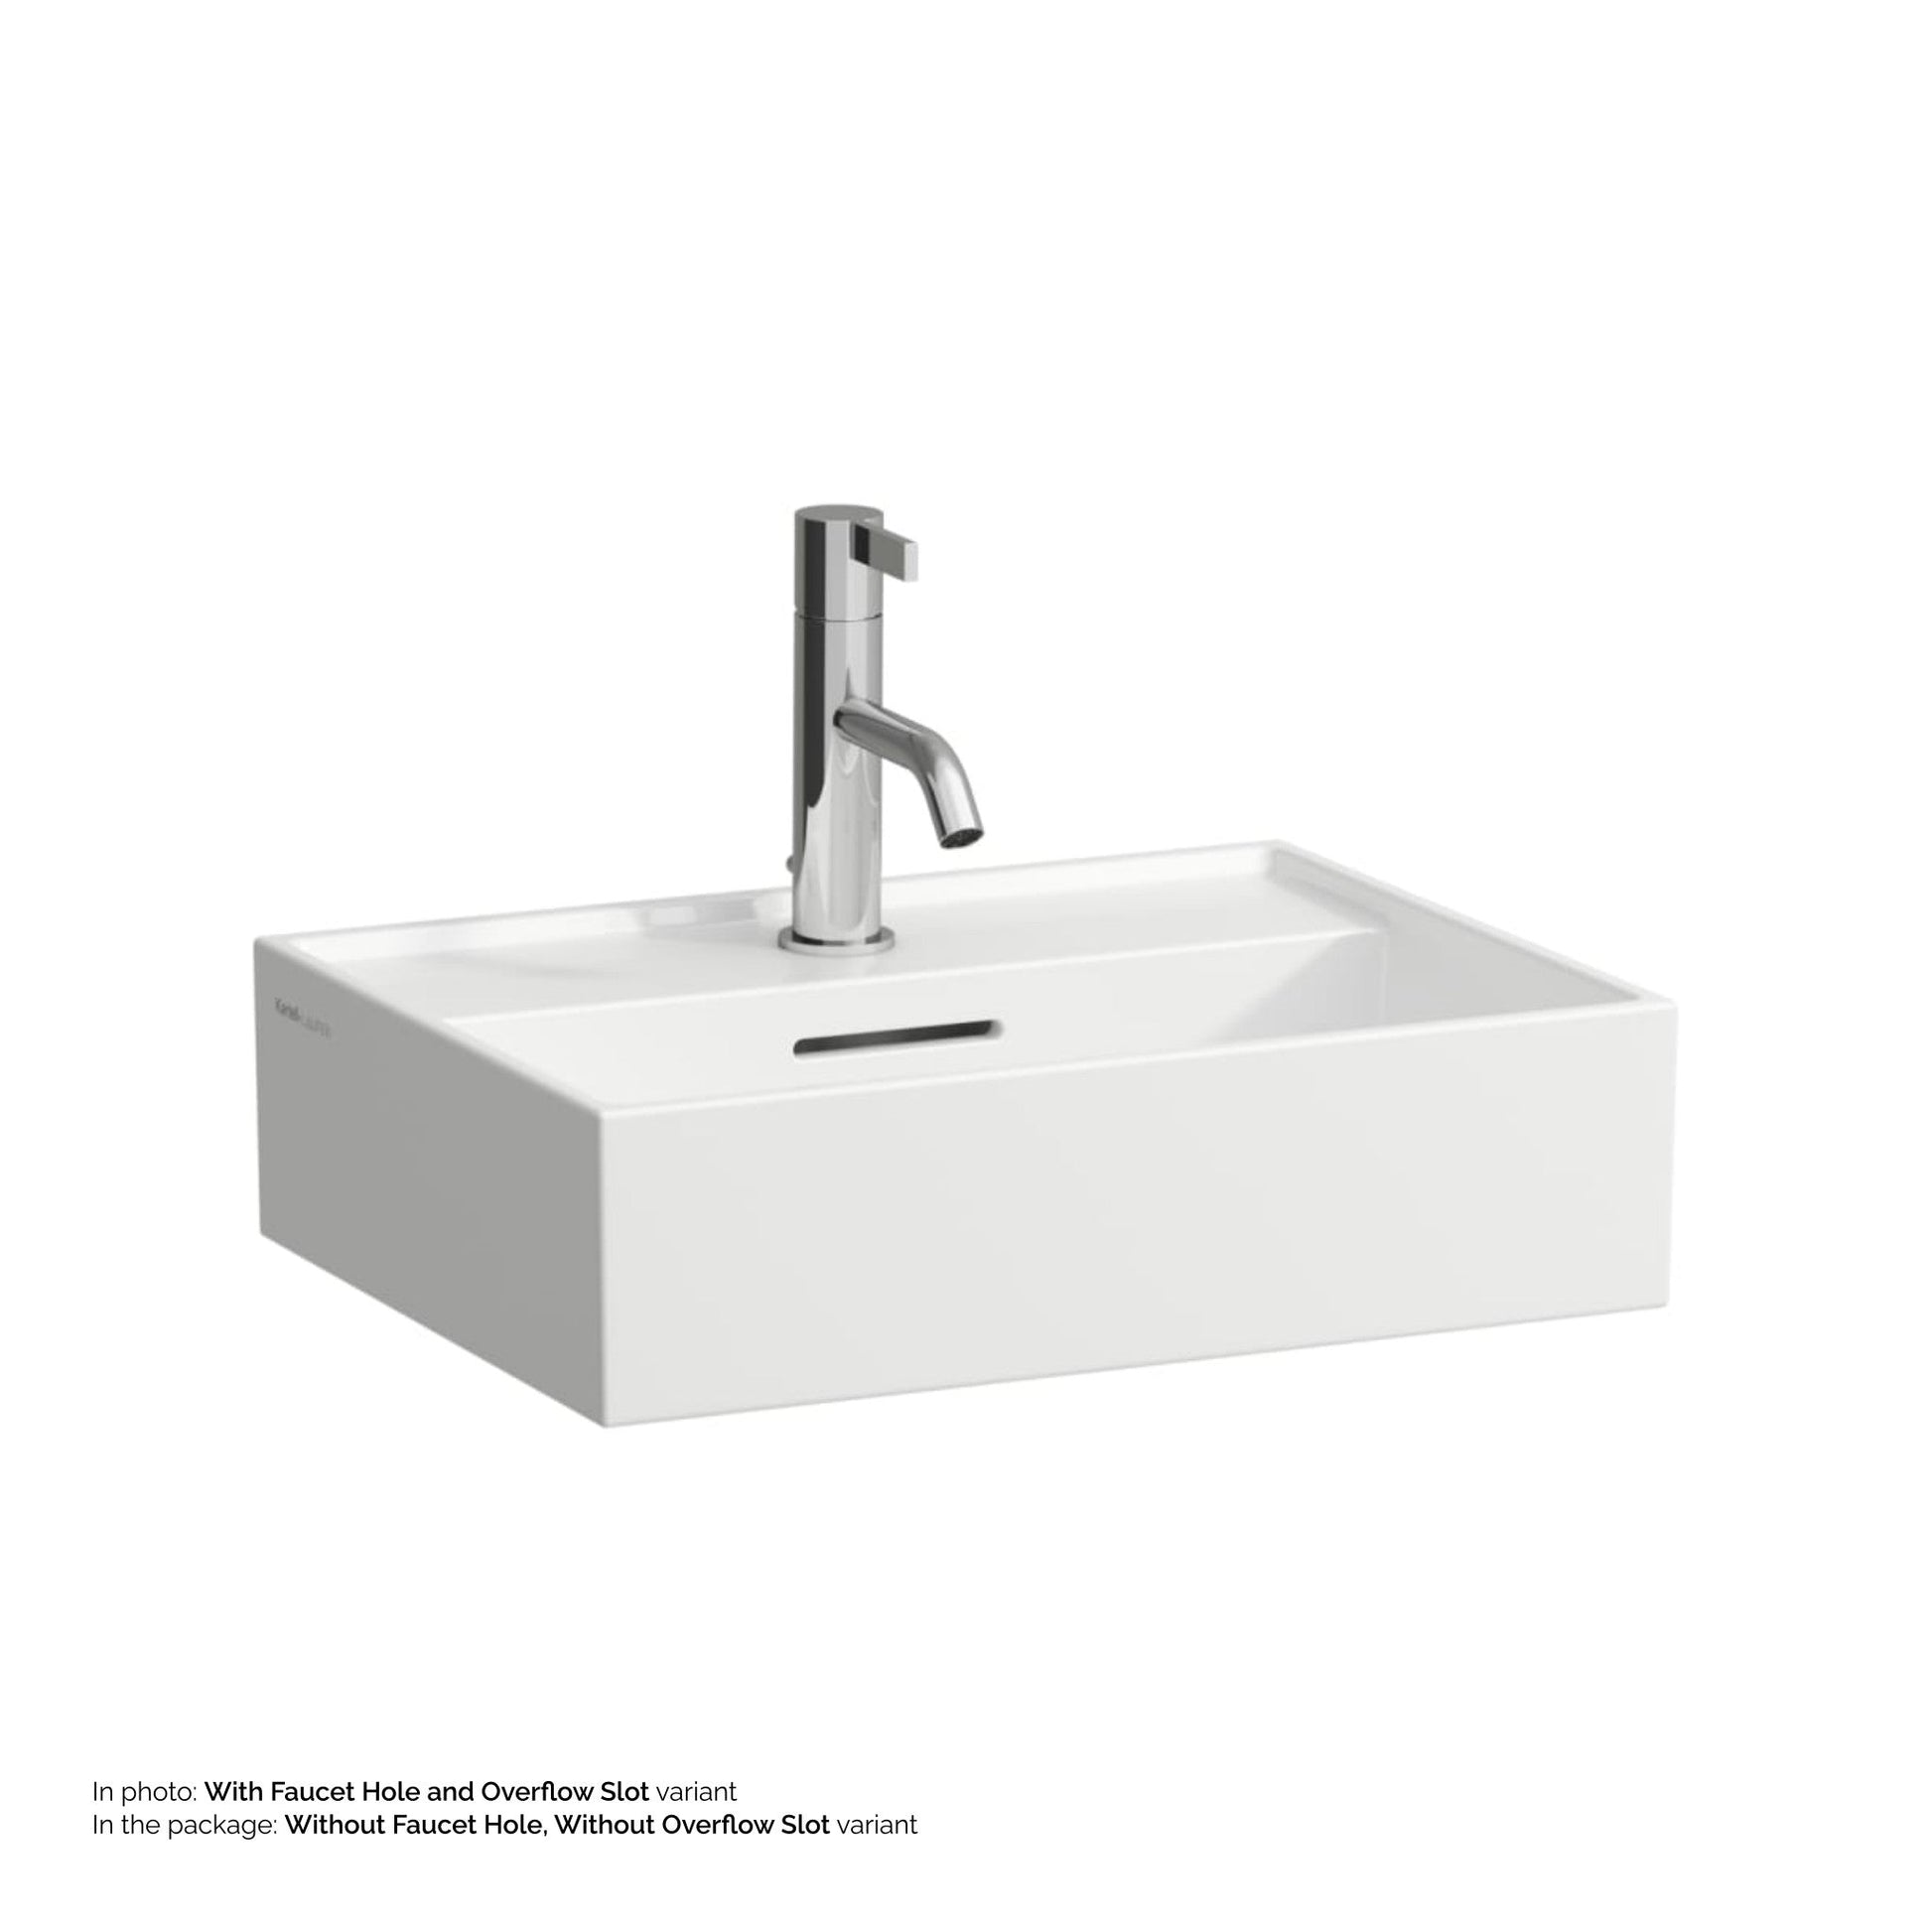 Laufen Kartell 18" x 13" White Countertop Bathroom Sink Without Faucet Hole